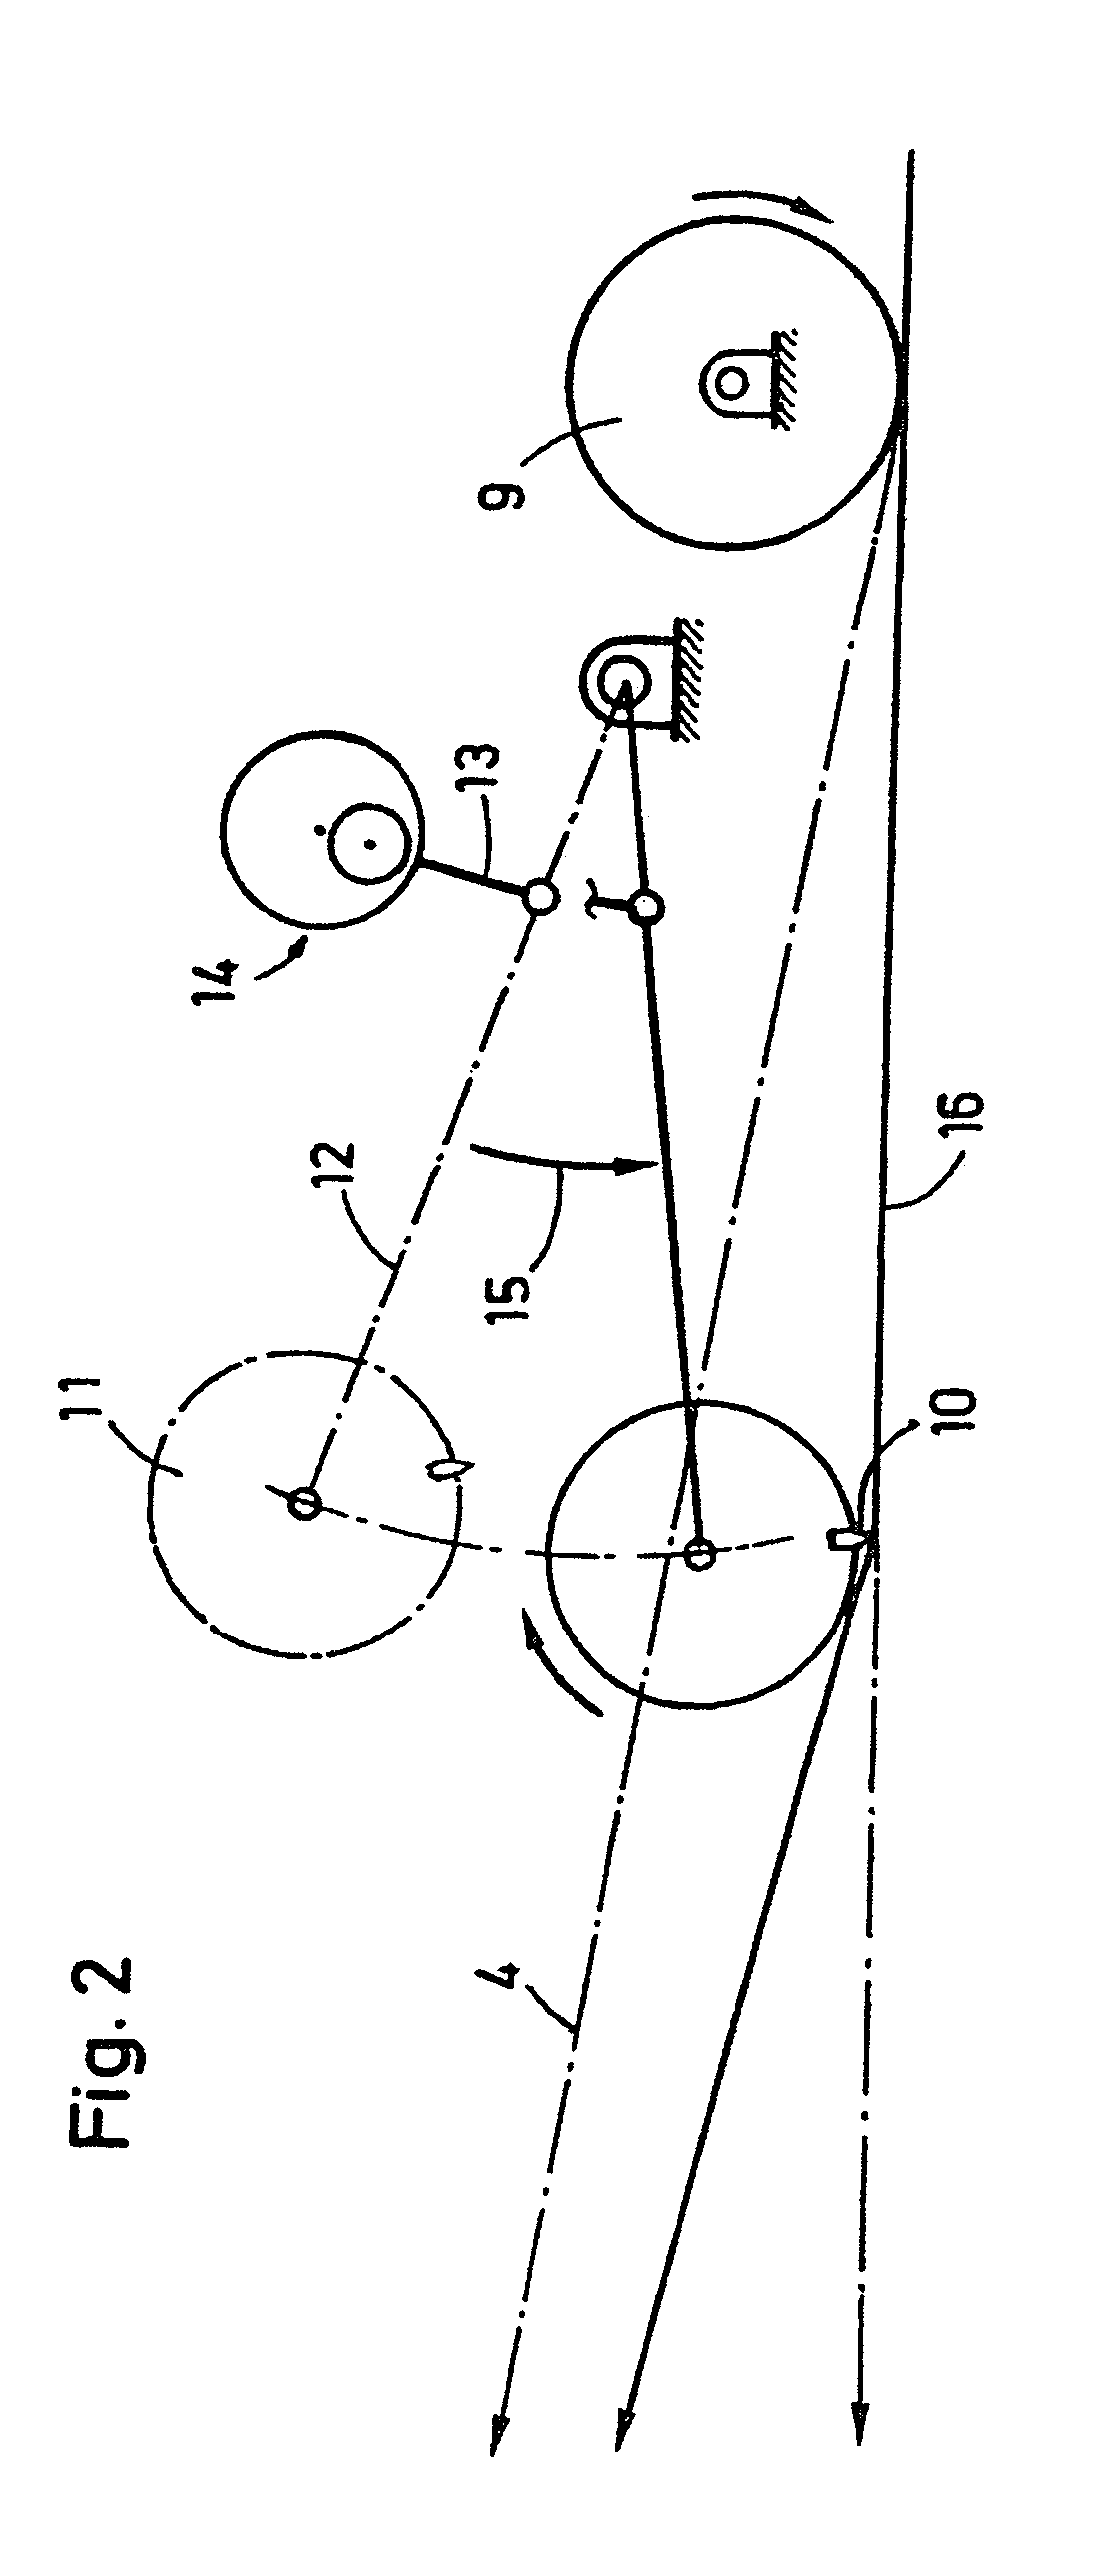 Method of operating a flying shear